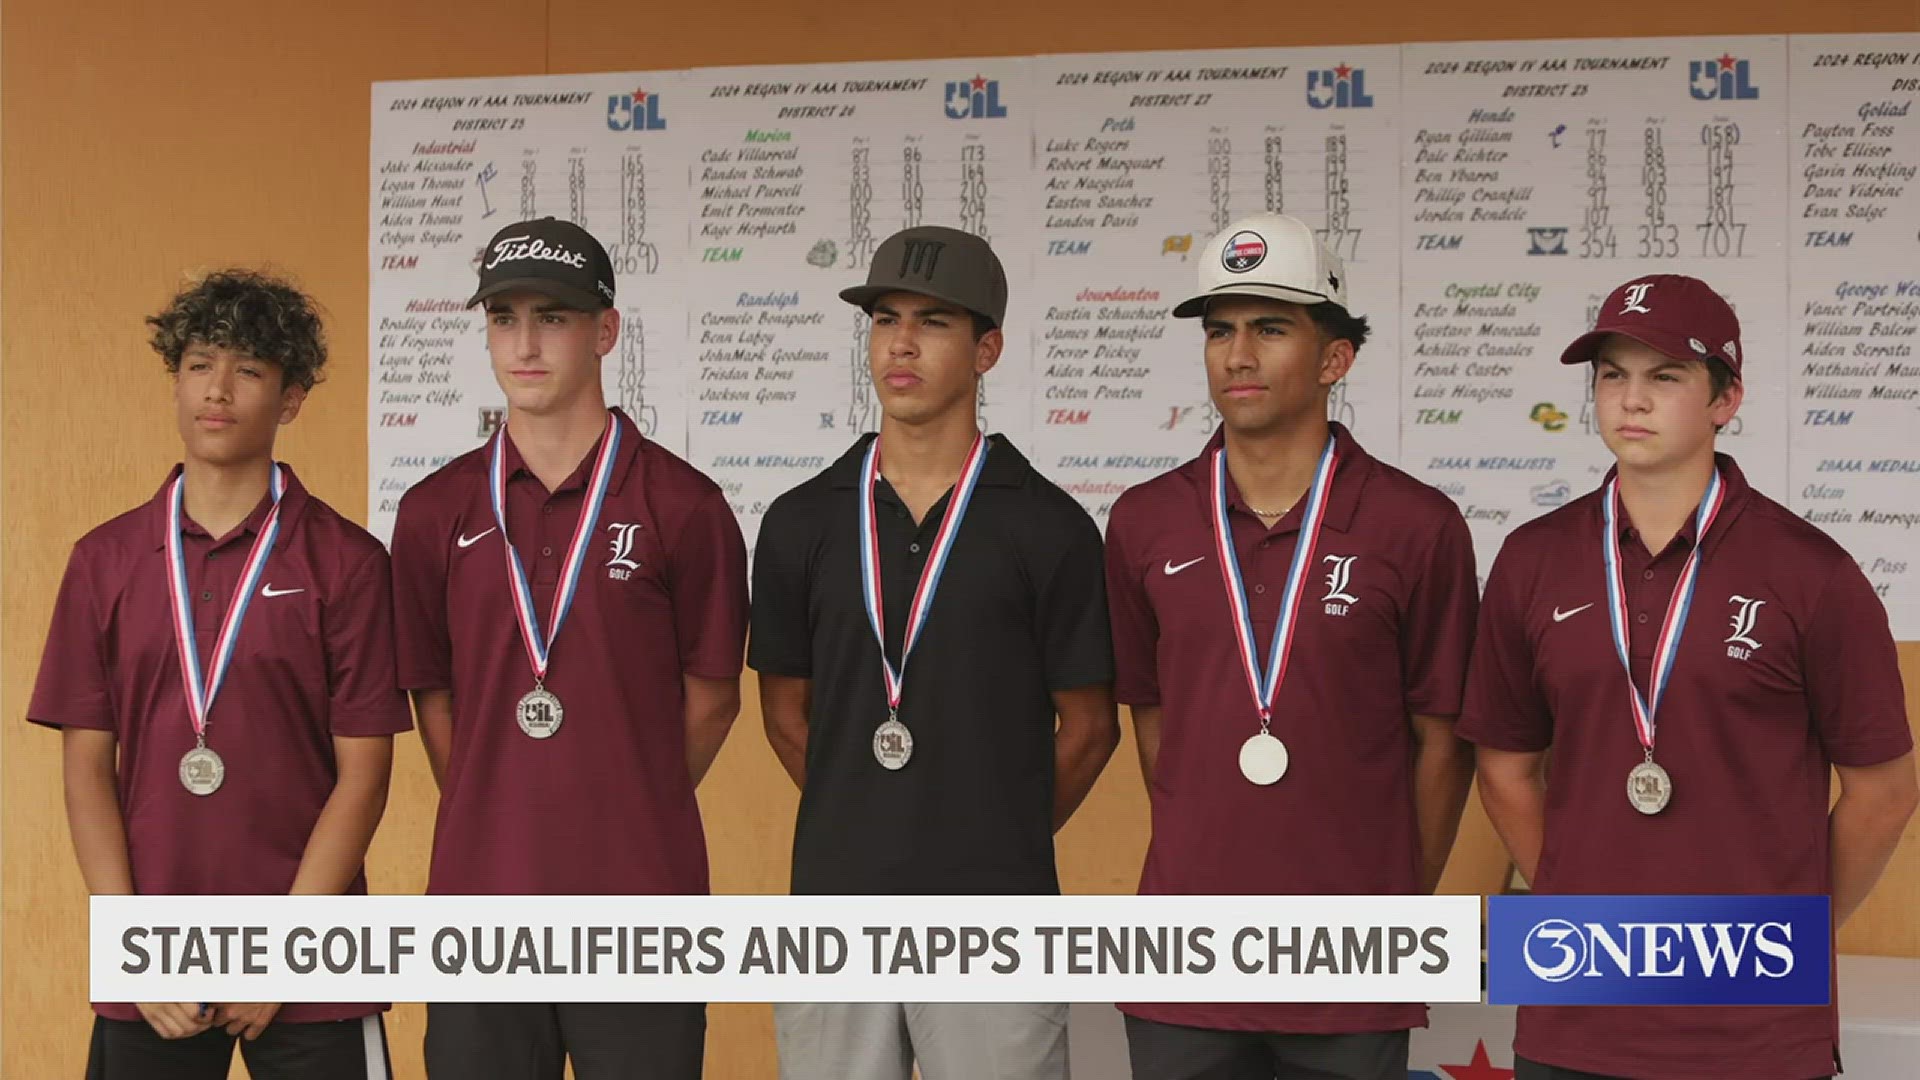 The London boys qualified for the state golf tournament, as did G-P's Broc Talamantez. The IWA Angels' boys also brought home a TAPPS state title.